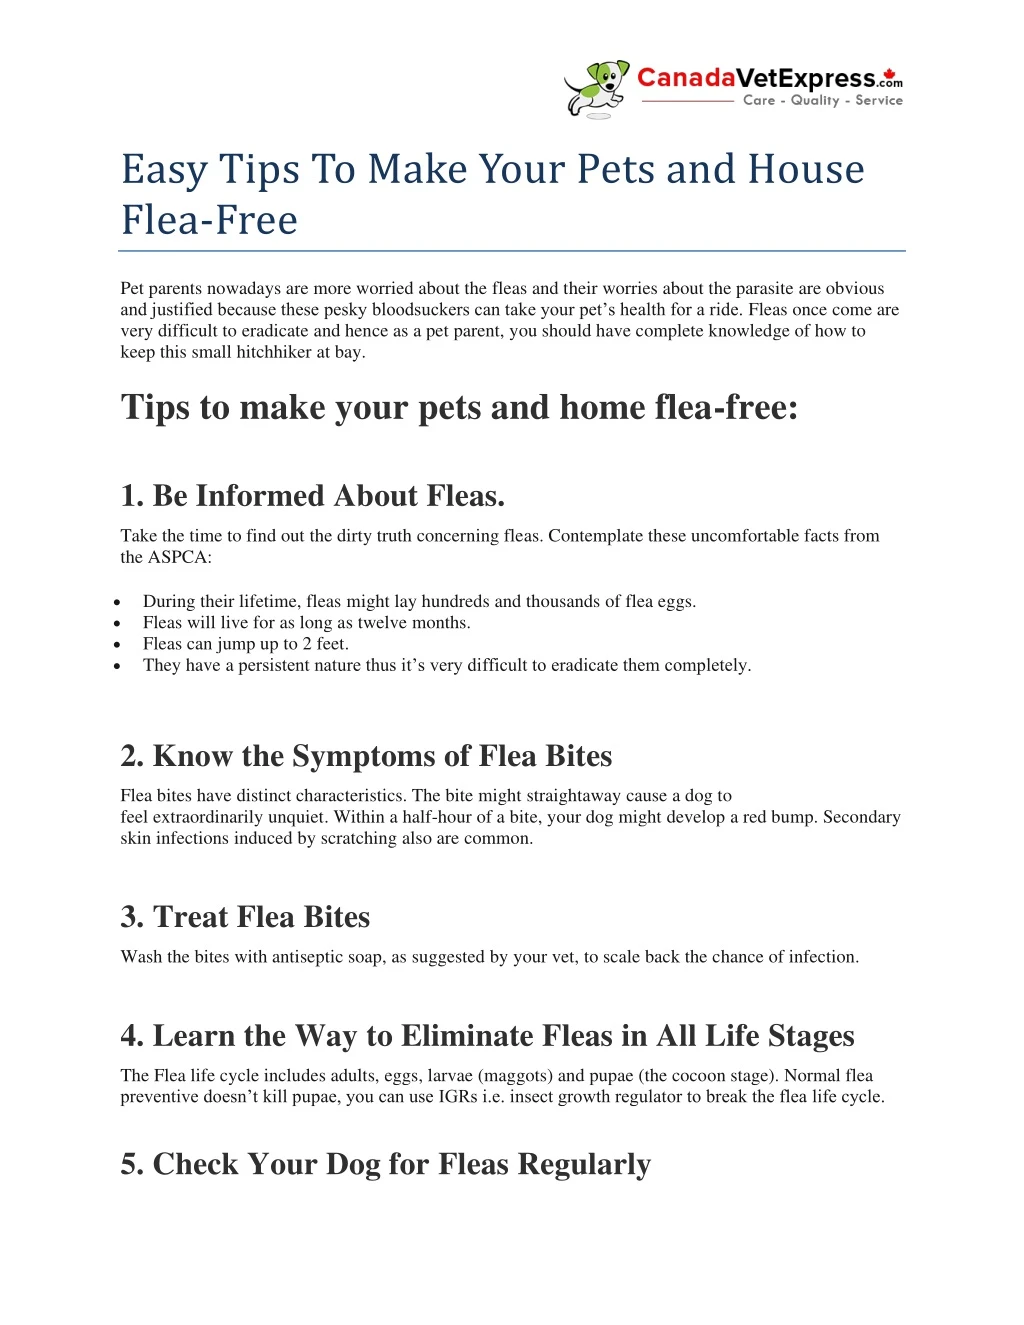 easy tips to make your pets and house flea free